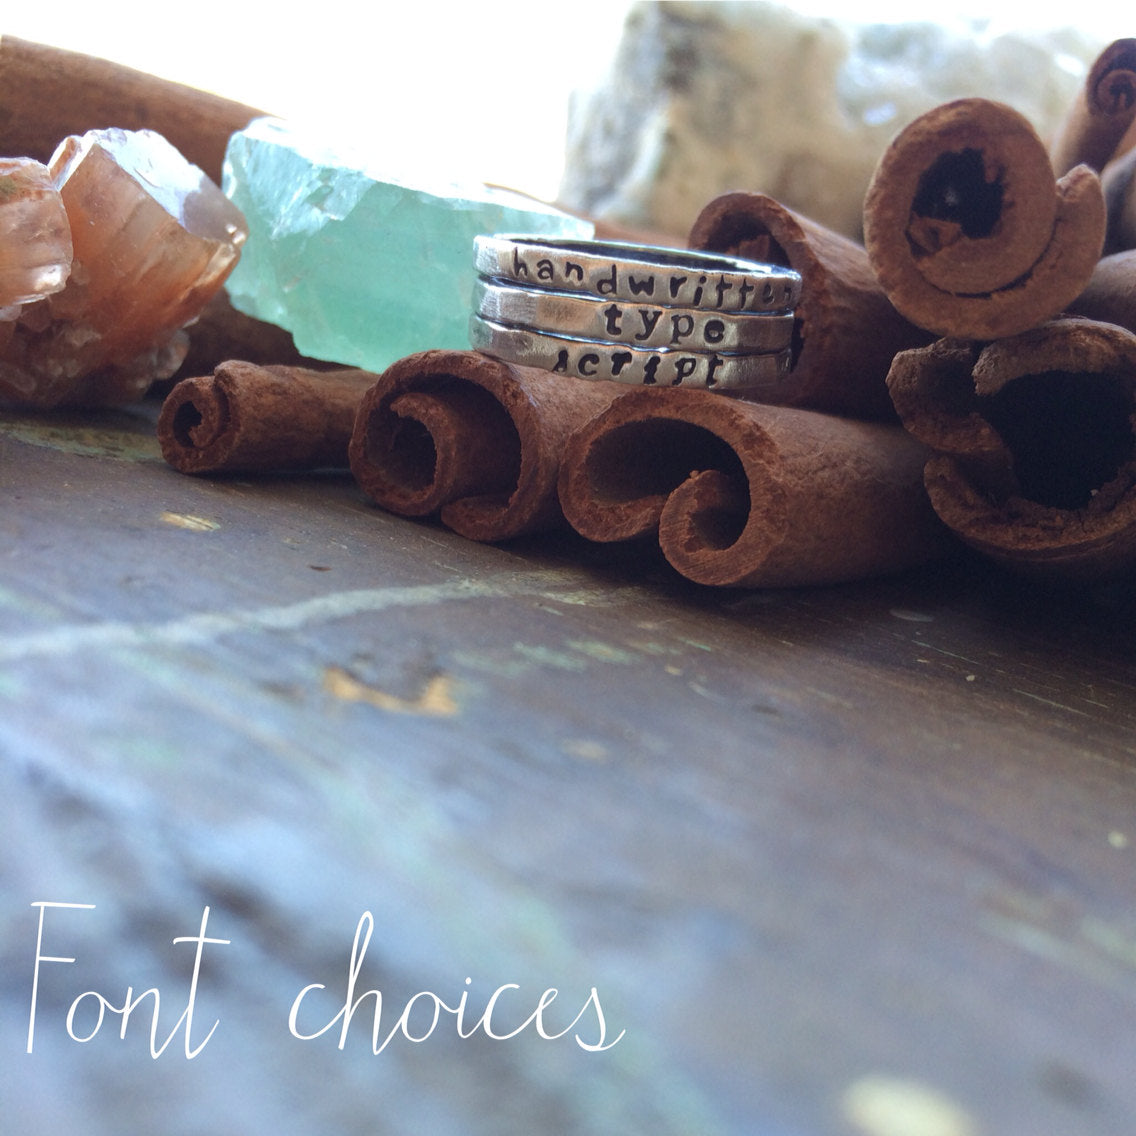 Silver Stamped Stacking Rings